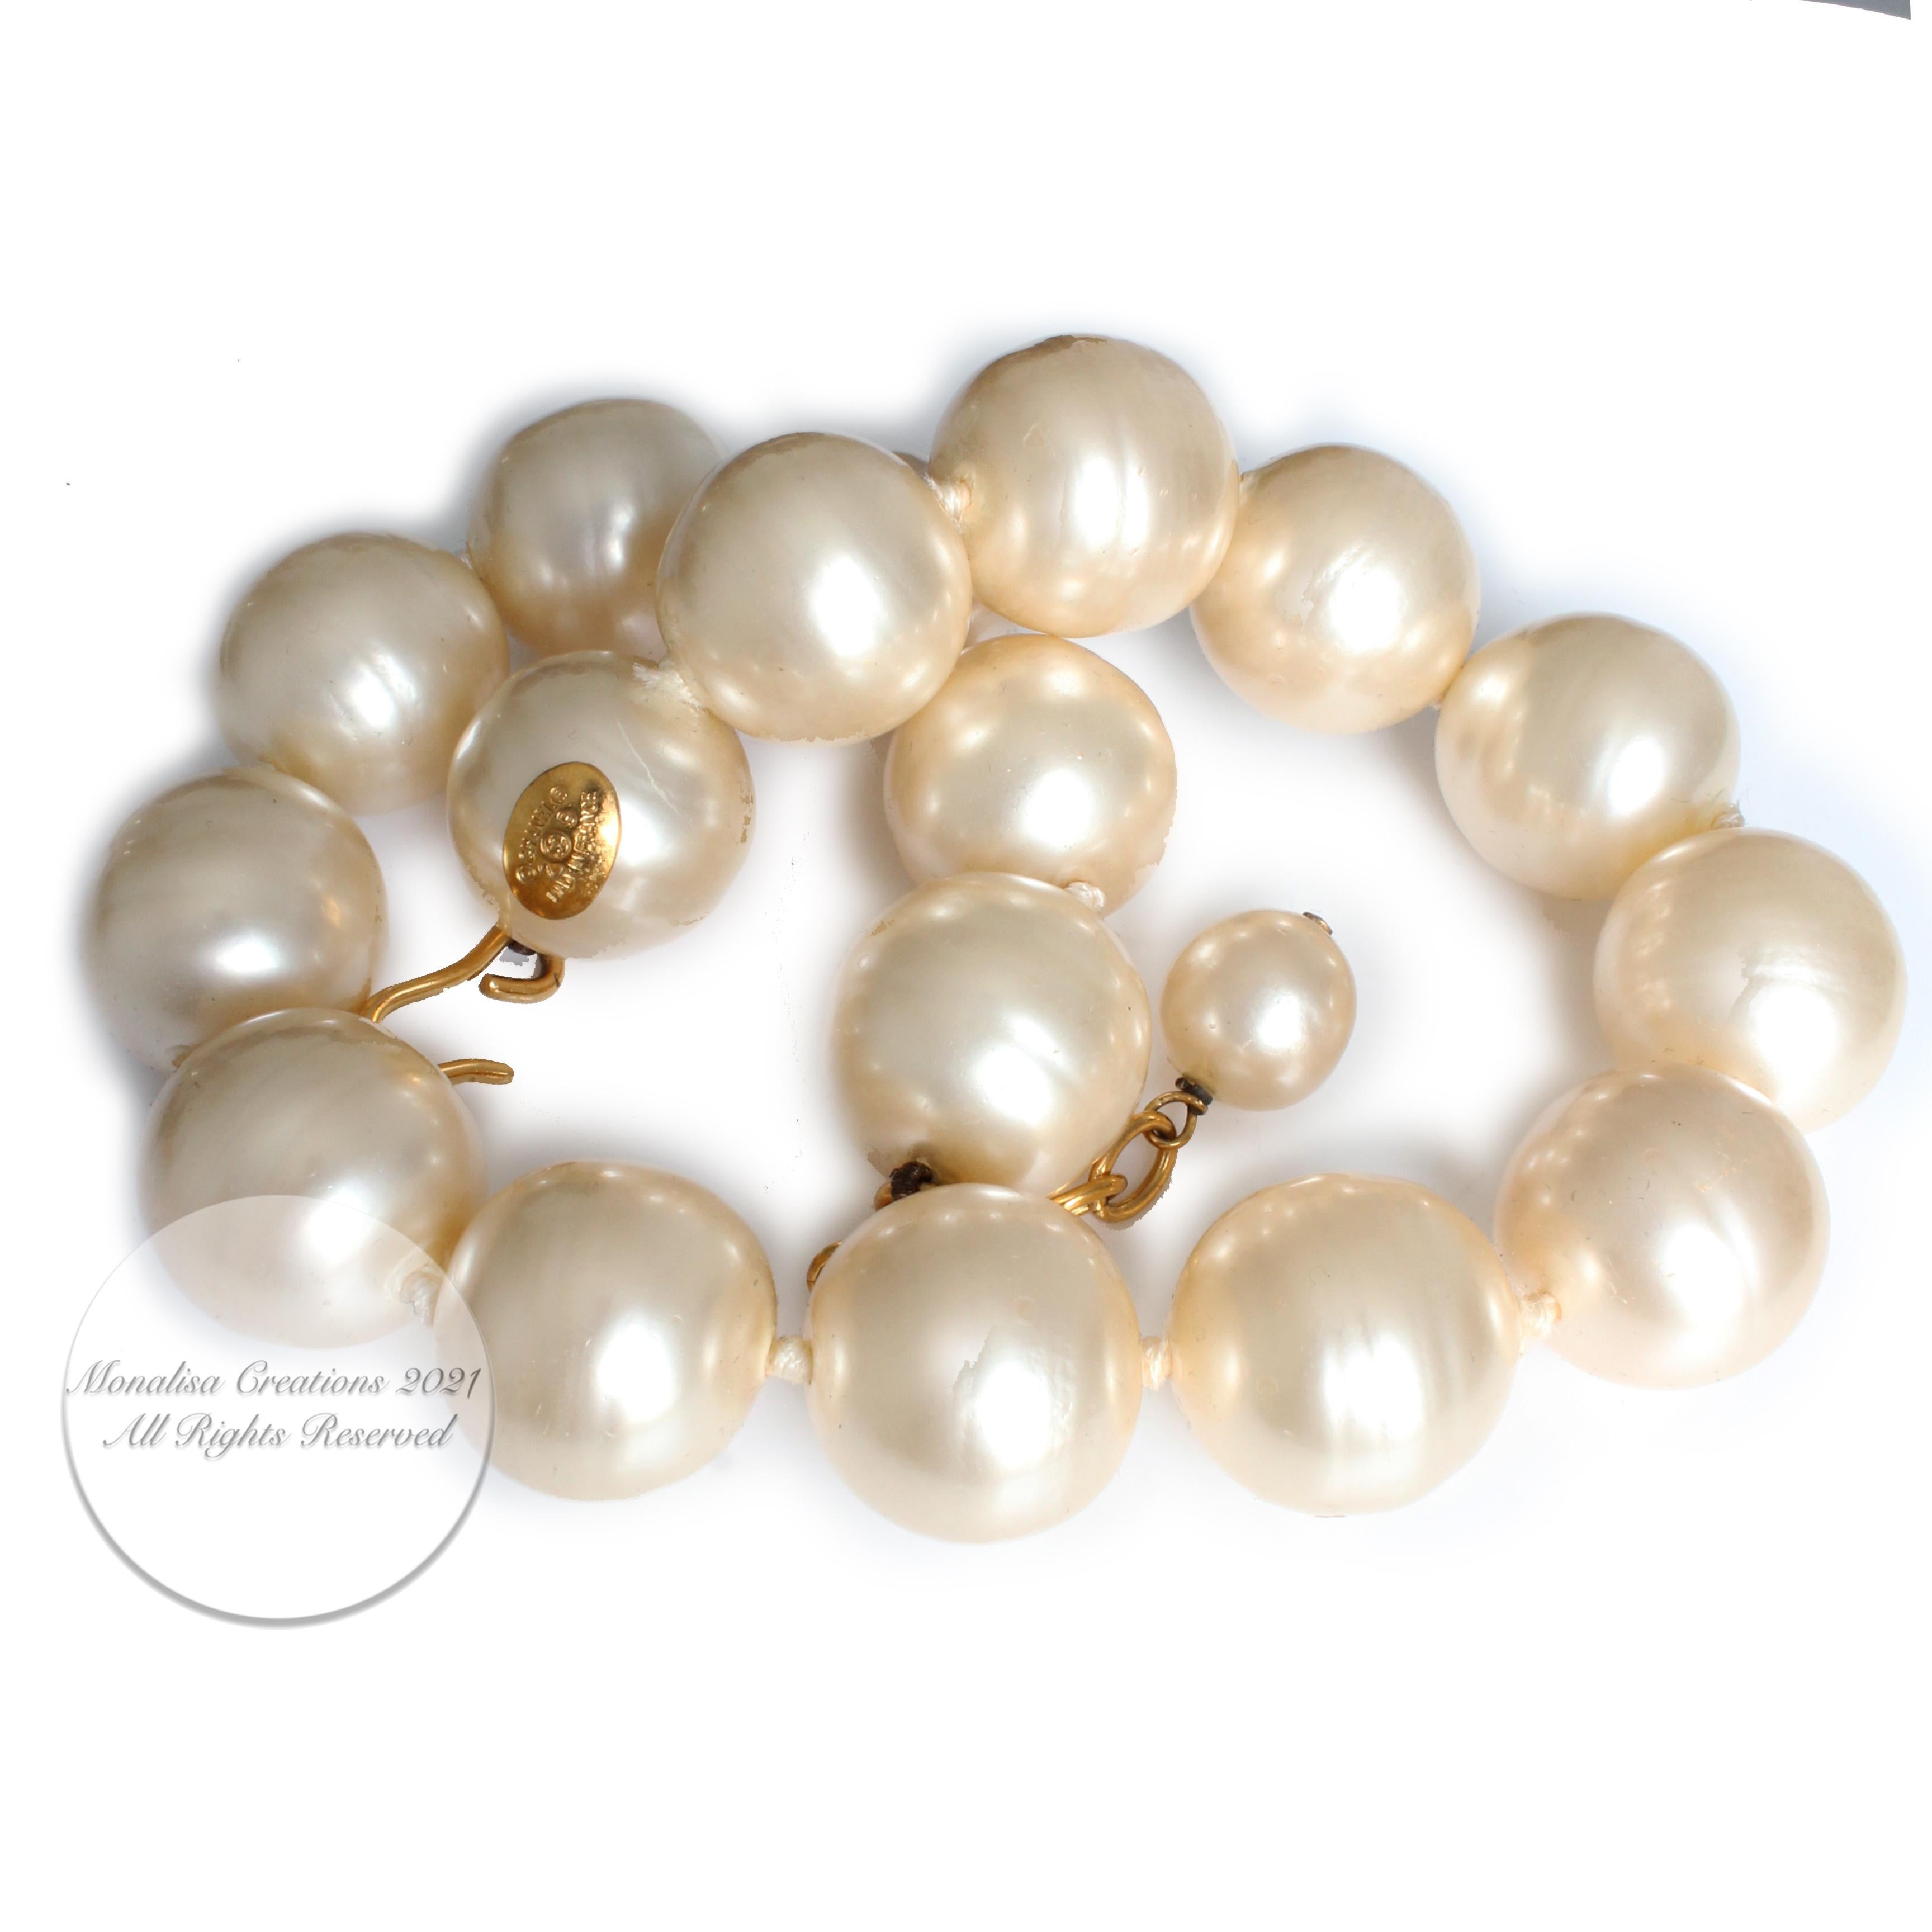 Iconic large Baroque pearl choker necklace from Chanel, circa 1990s and designed under Victoire de Castellane season 2 9.  Each pearl is approximately .75in x .65in and the total length (including fastener and chain) is 19.75in and adjustable from